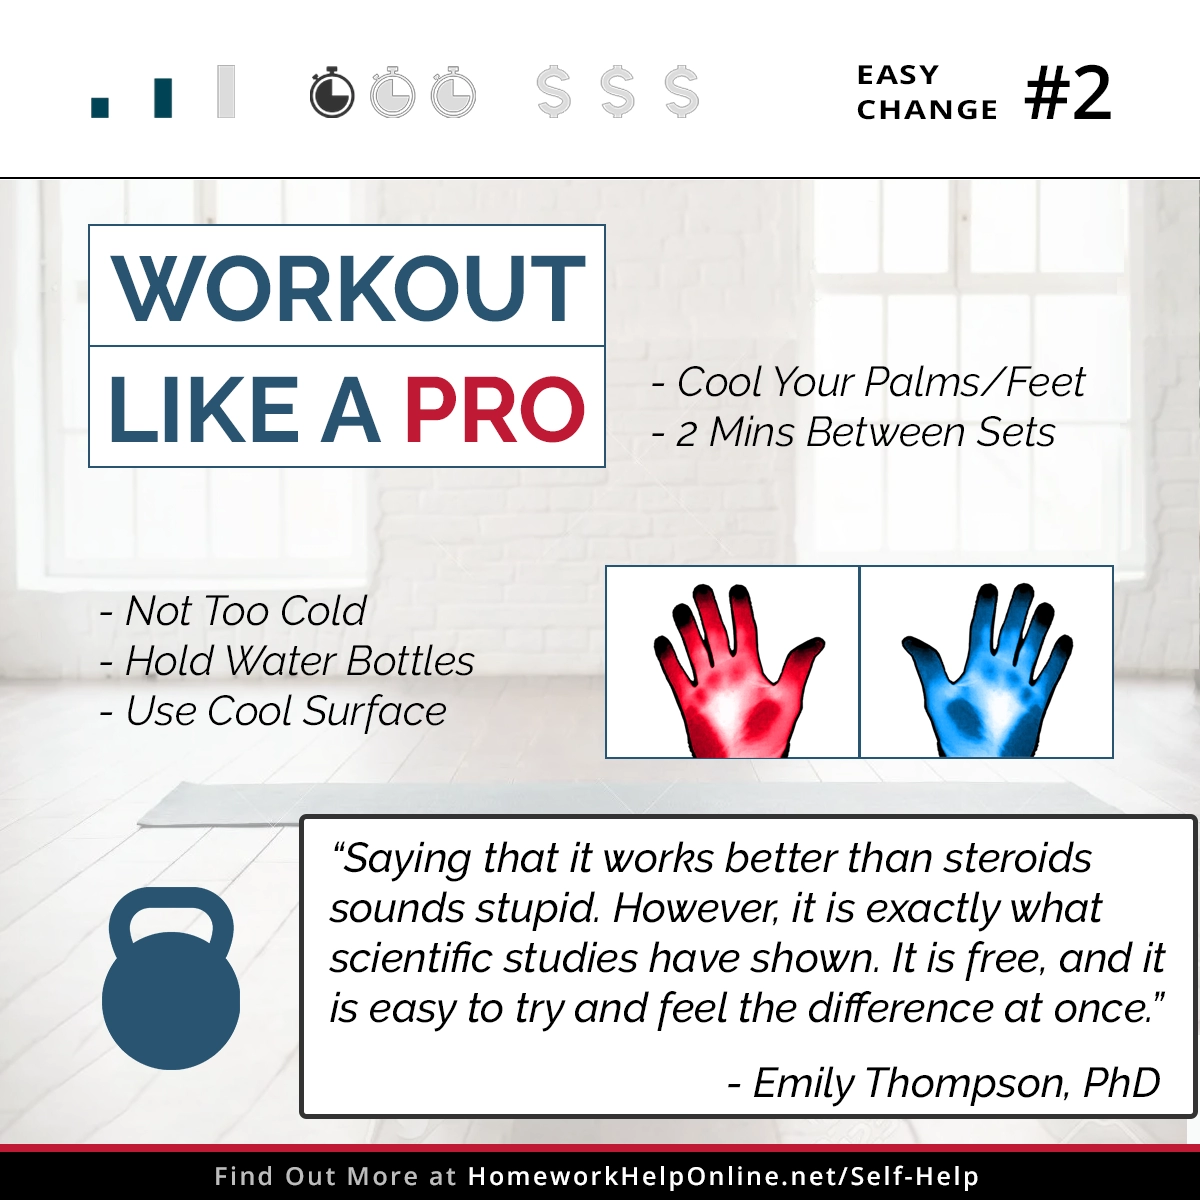 A scientifically proven workout performance booster: cooling hands between sets.